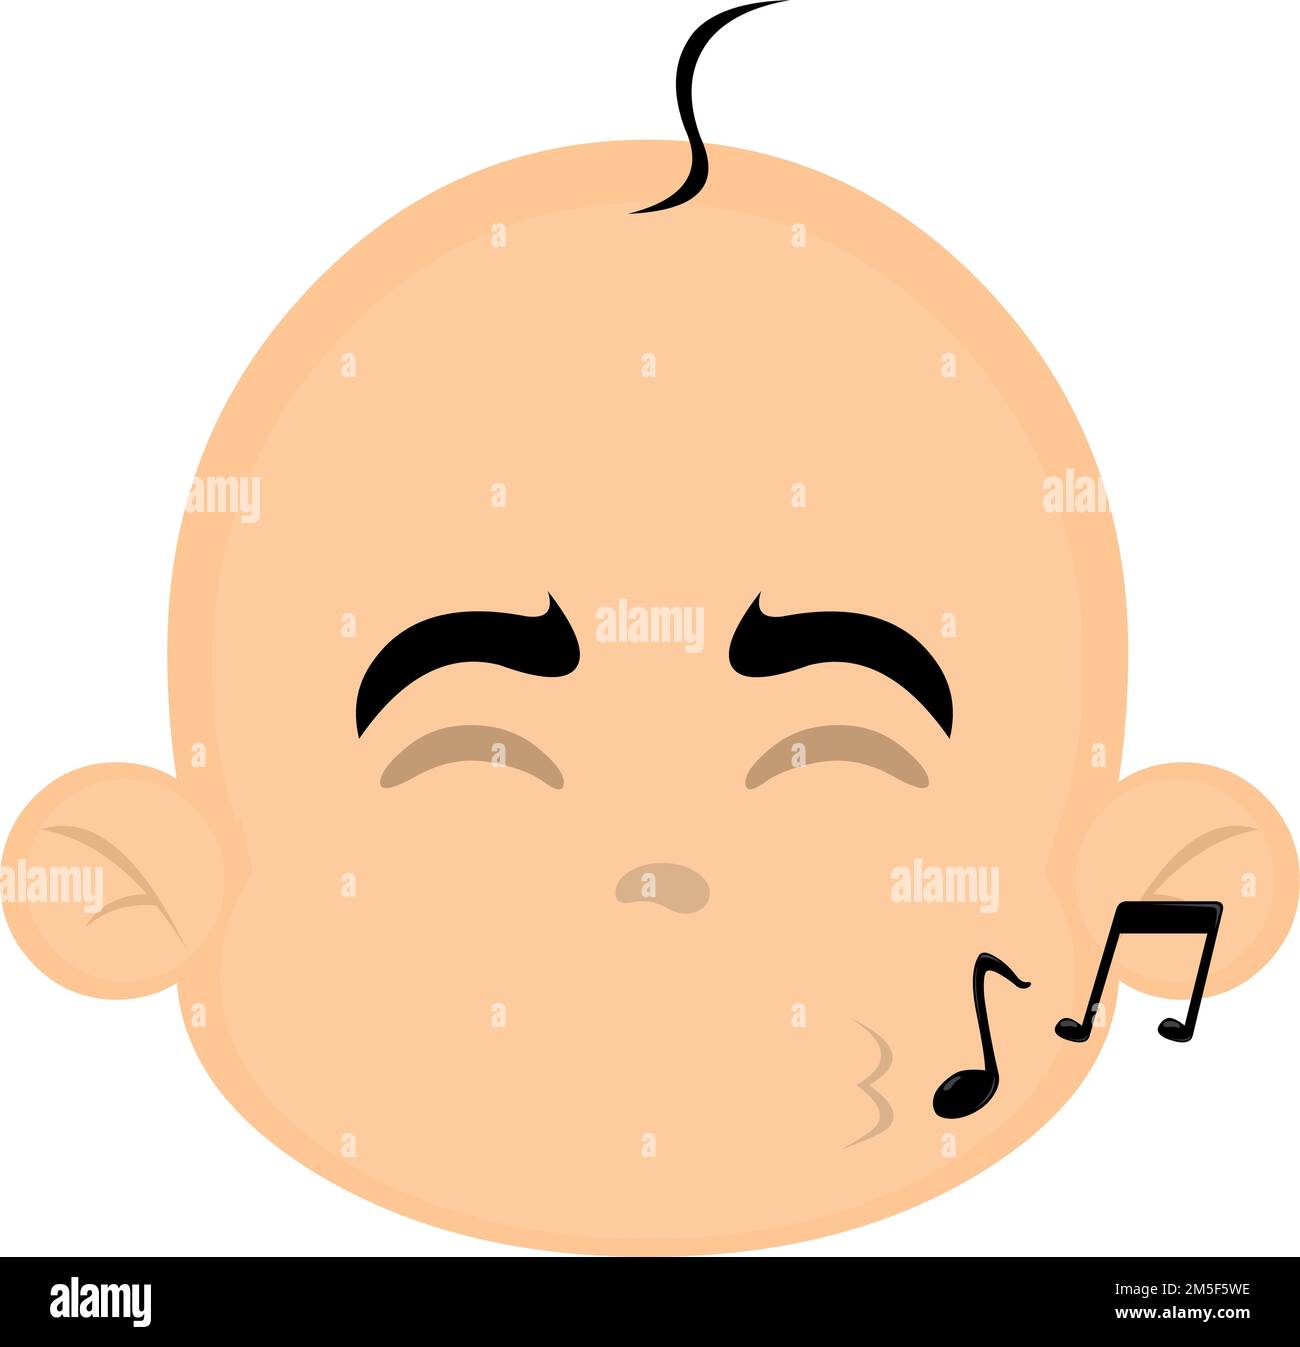 vector illustration of the face of a baby cartoon whistling with musical notes Stock Vector